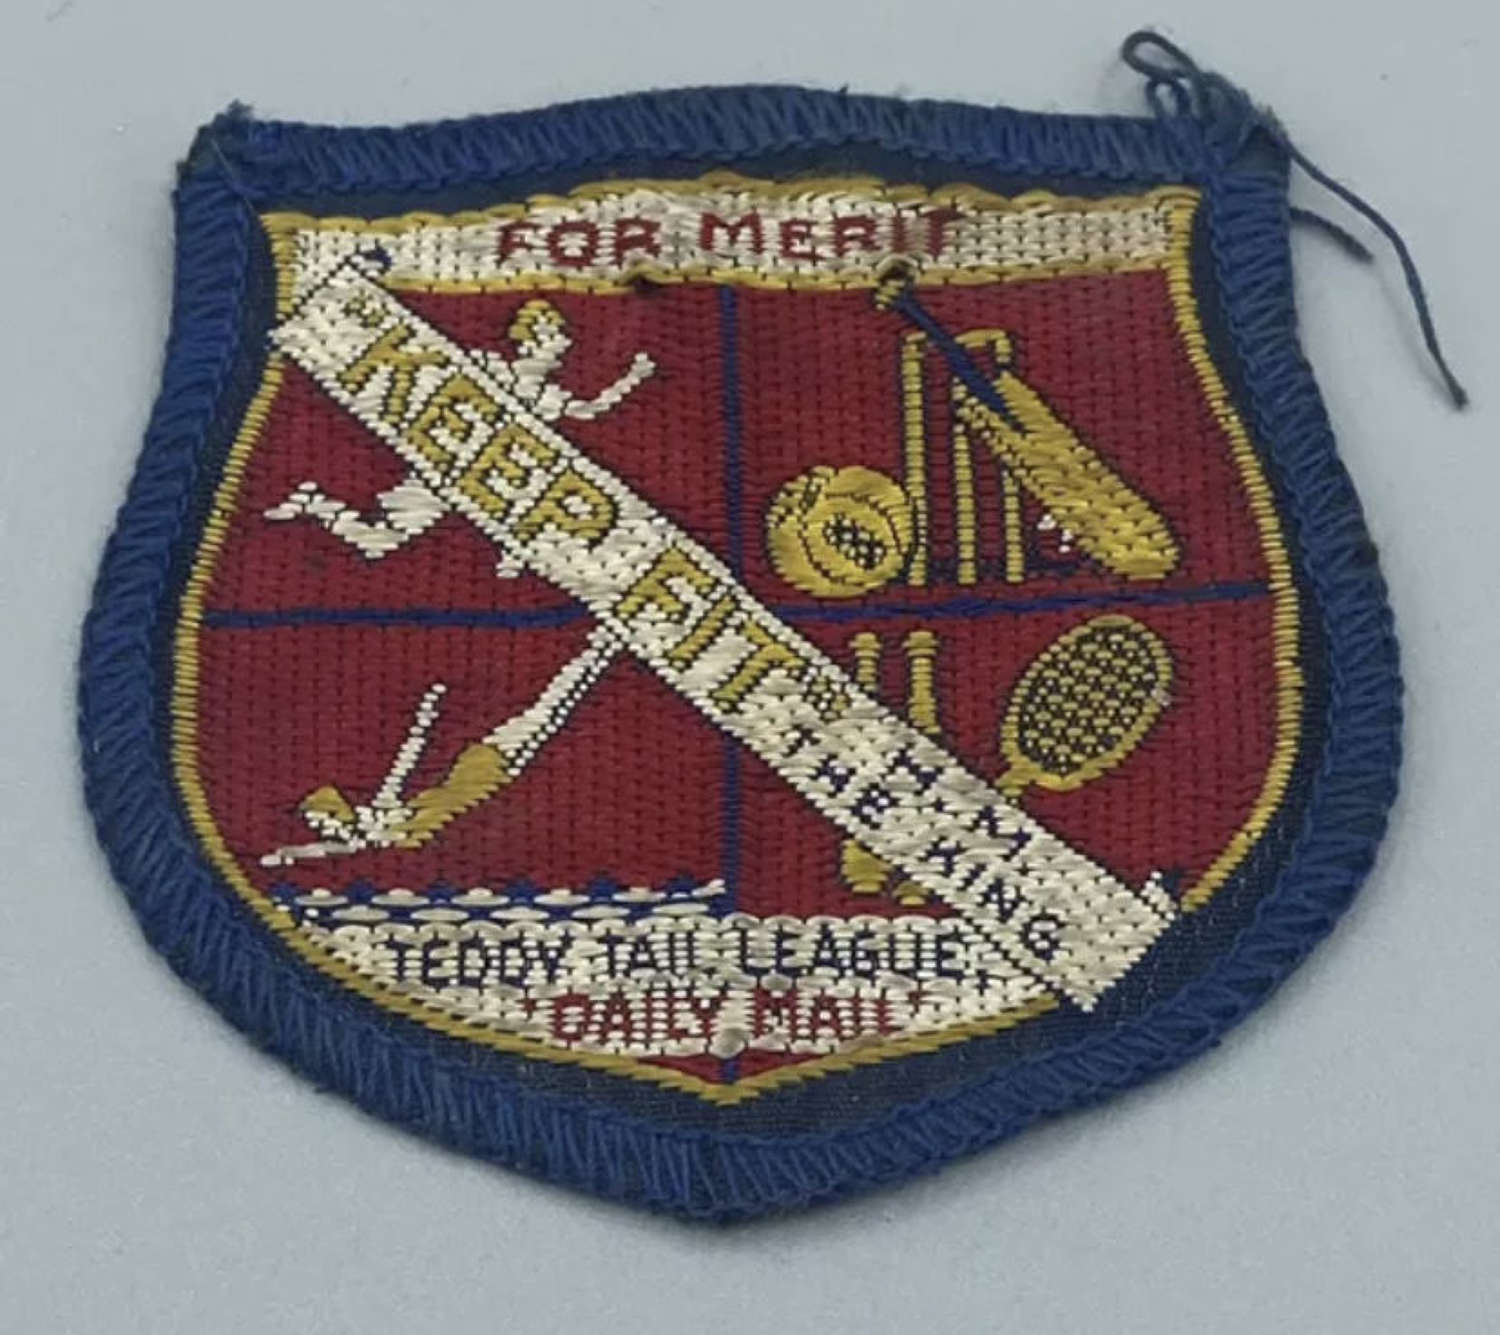 1940s Boys Girls Scouts Merit Keep Fit HM King Teddy Tail League Patch